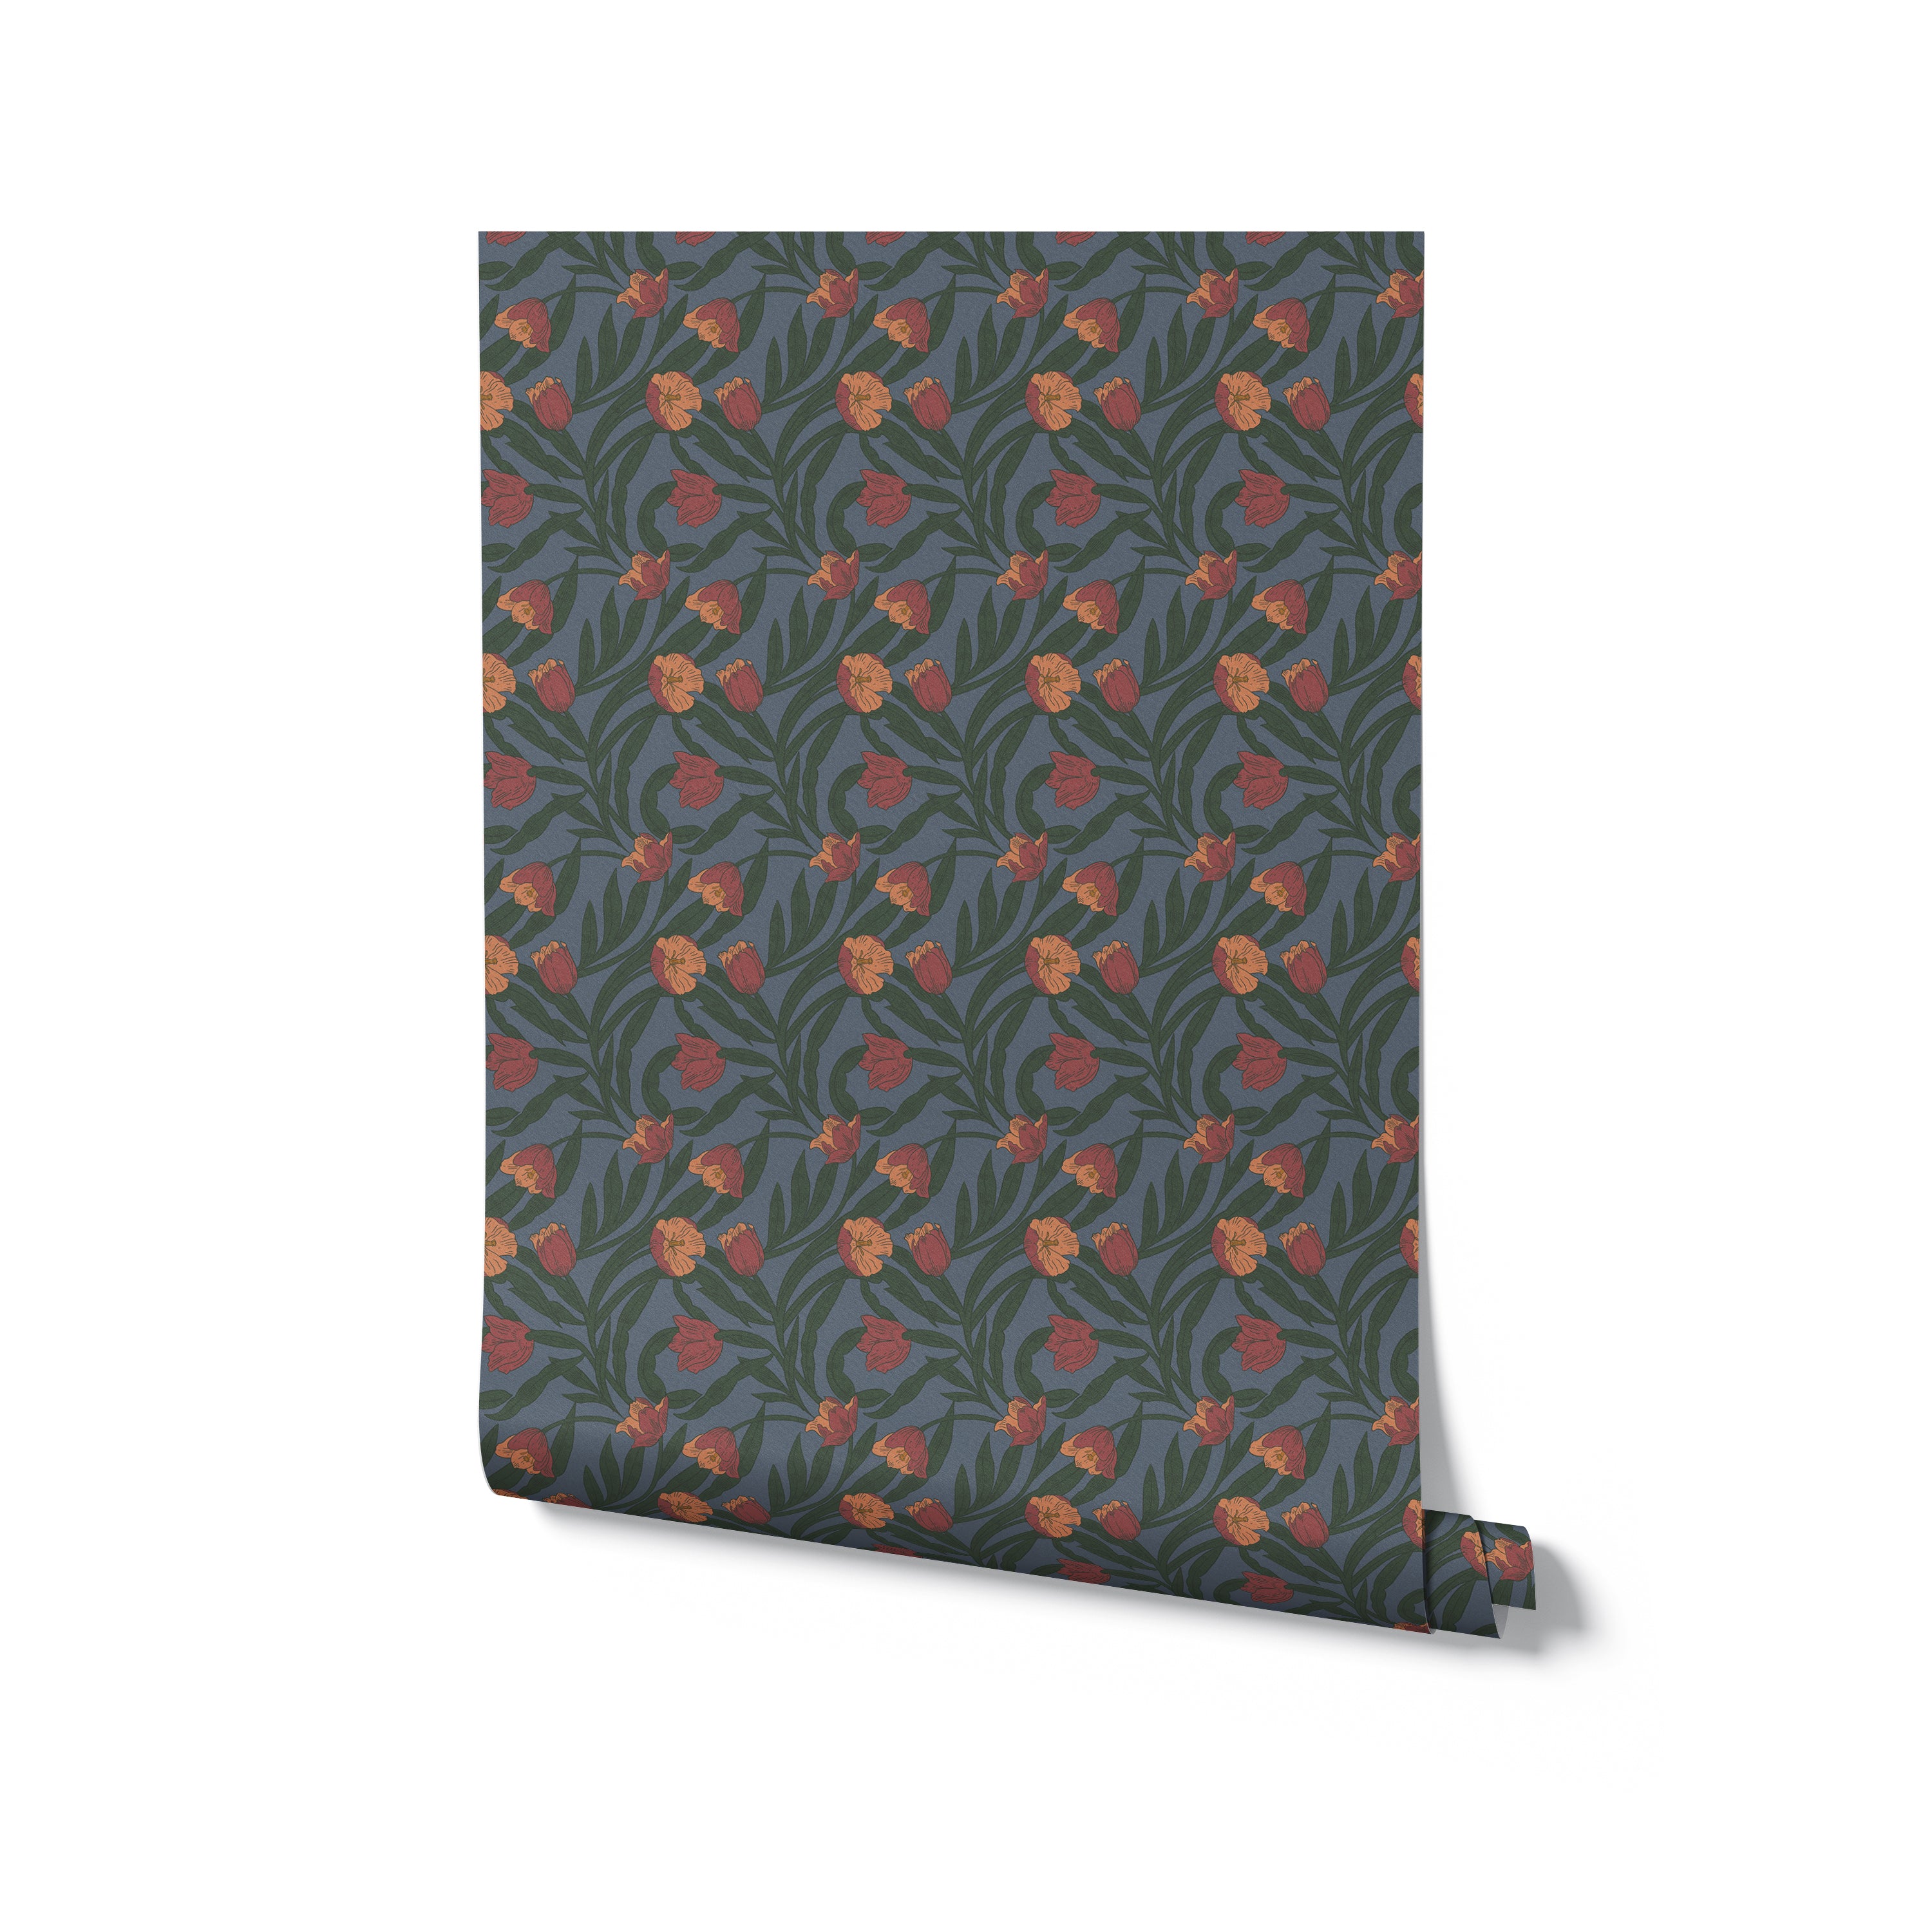 A rolled-up Morris Boho Wallpaper standing against a plain background. The wallpaper showcases a lively floral pattern with orange blooms and green foliage on a dark backdrop, perfect for adding a touch of bohemian elegance to any room.